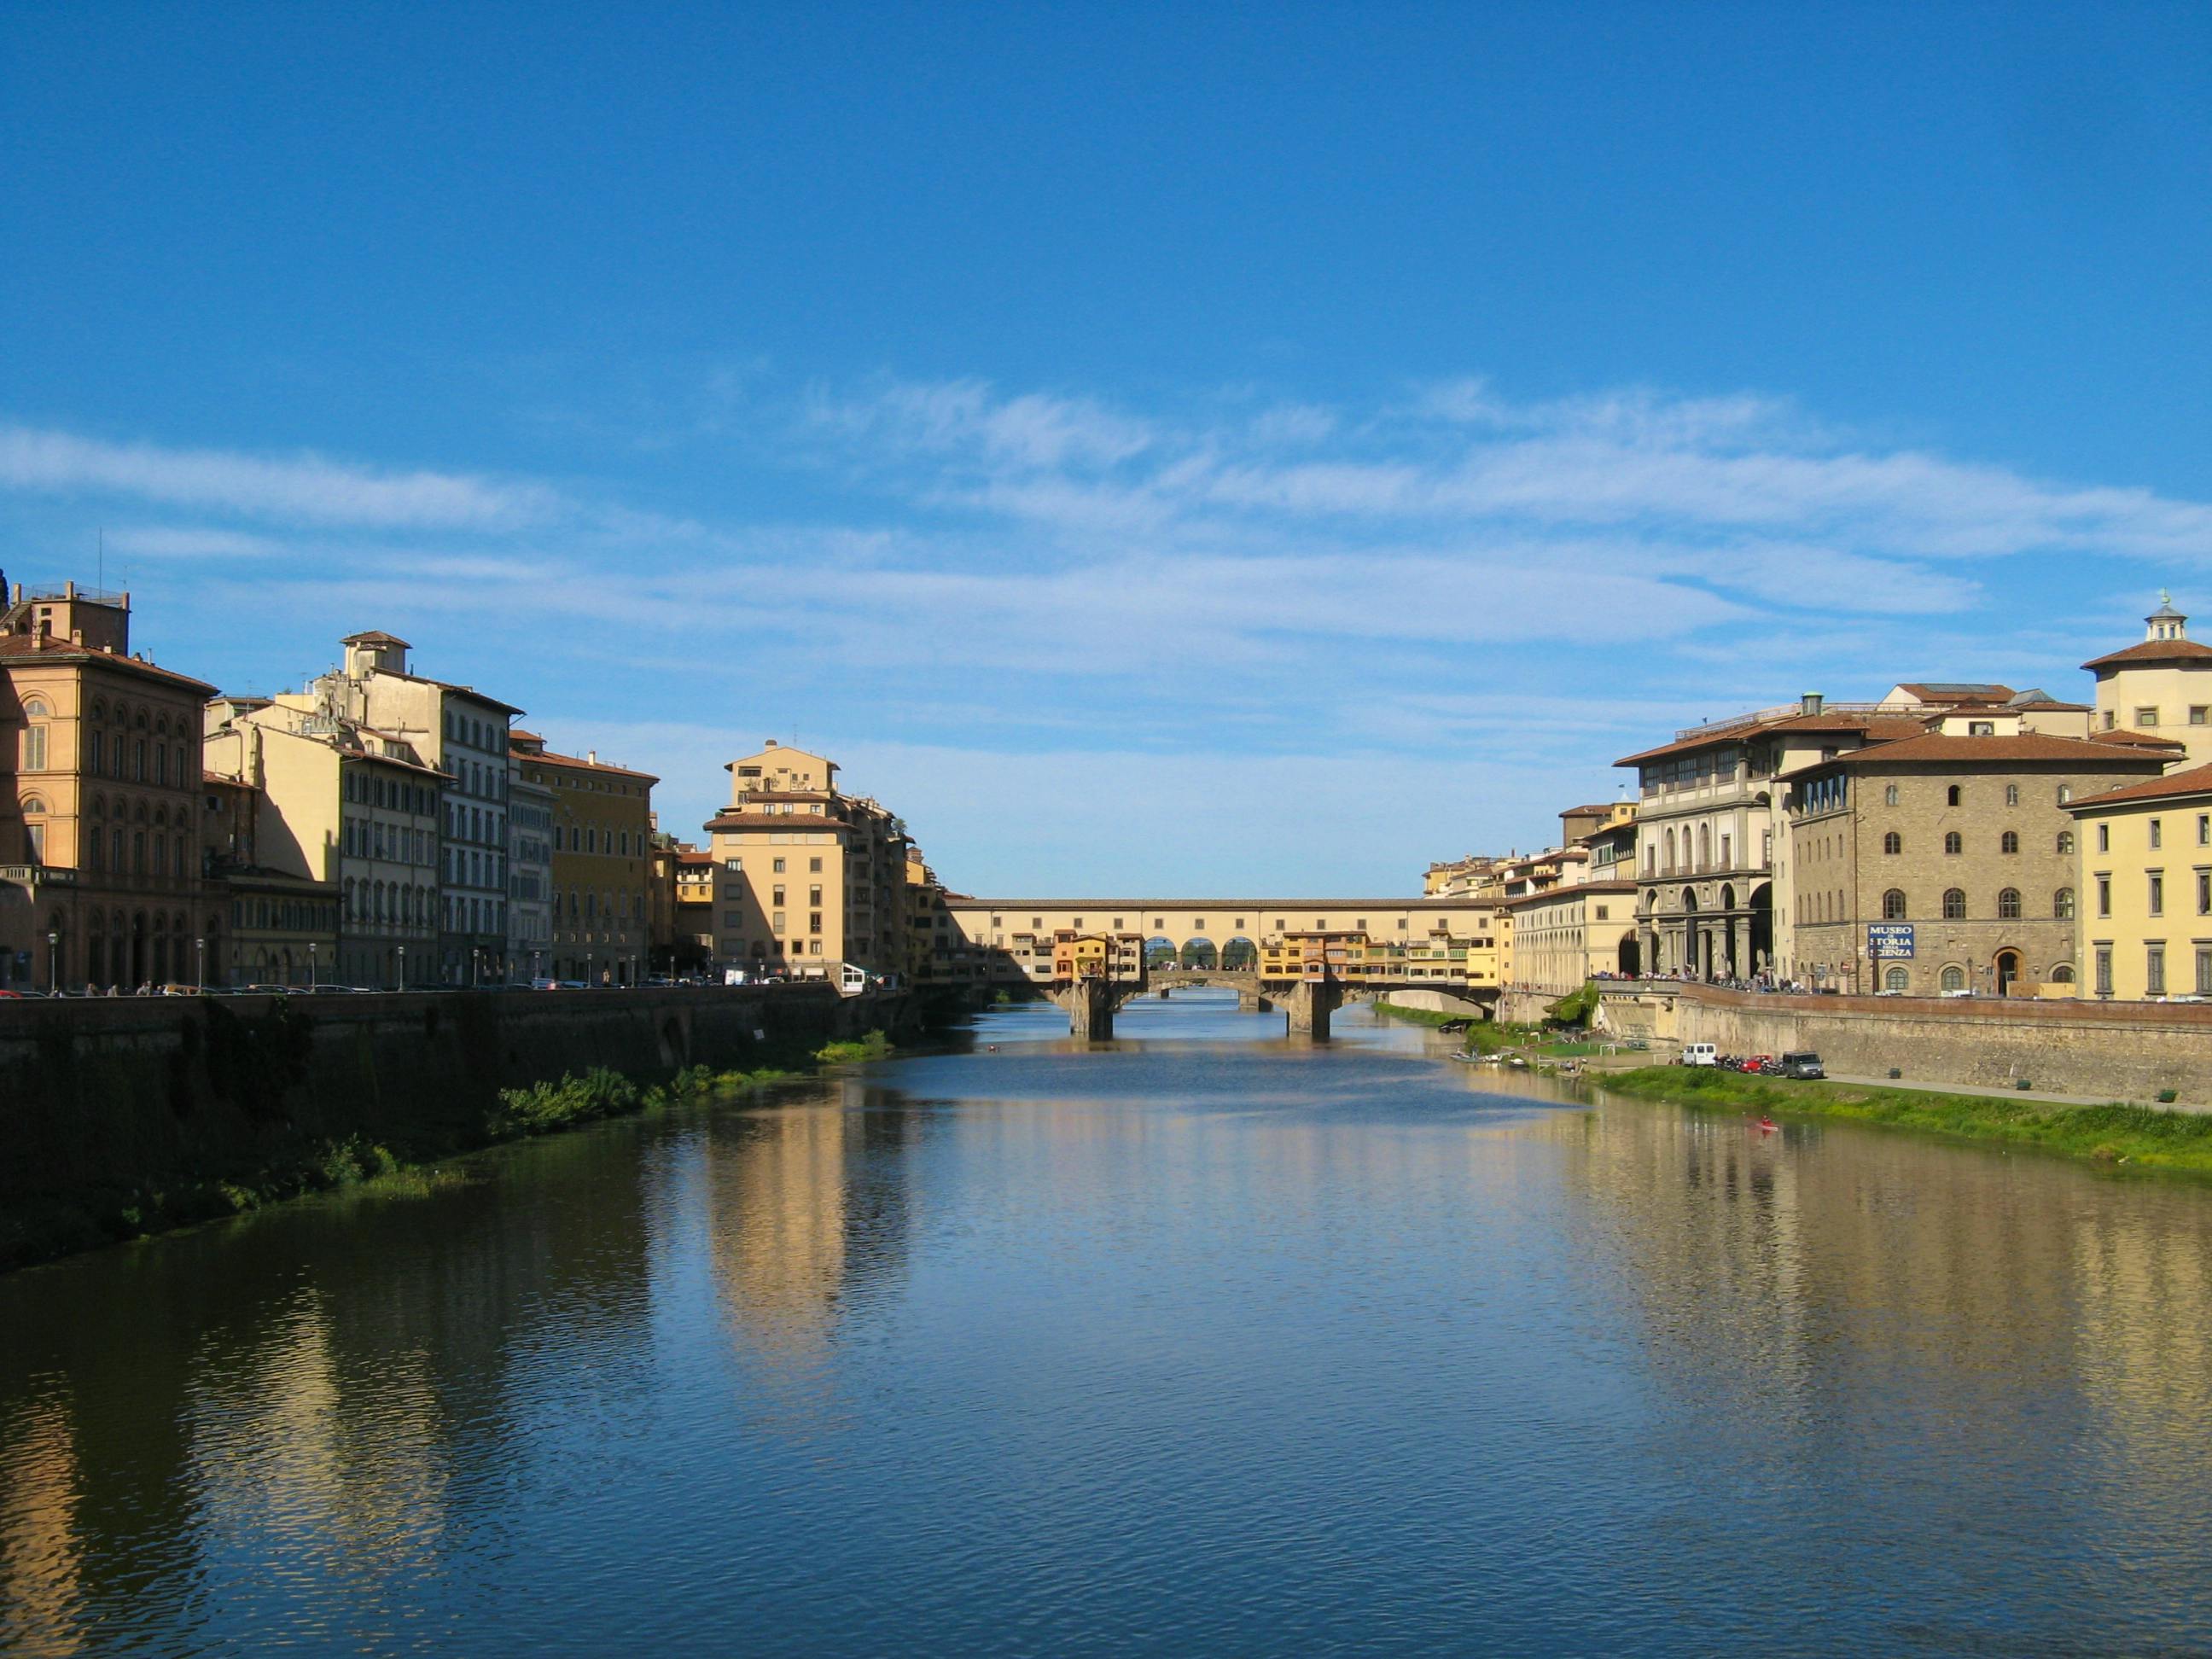 Ponte Vecchio in Florence, Italy: Oldest bridge in Florence over ...